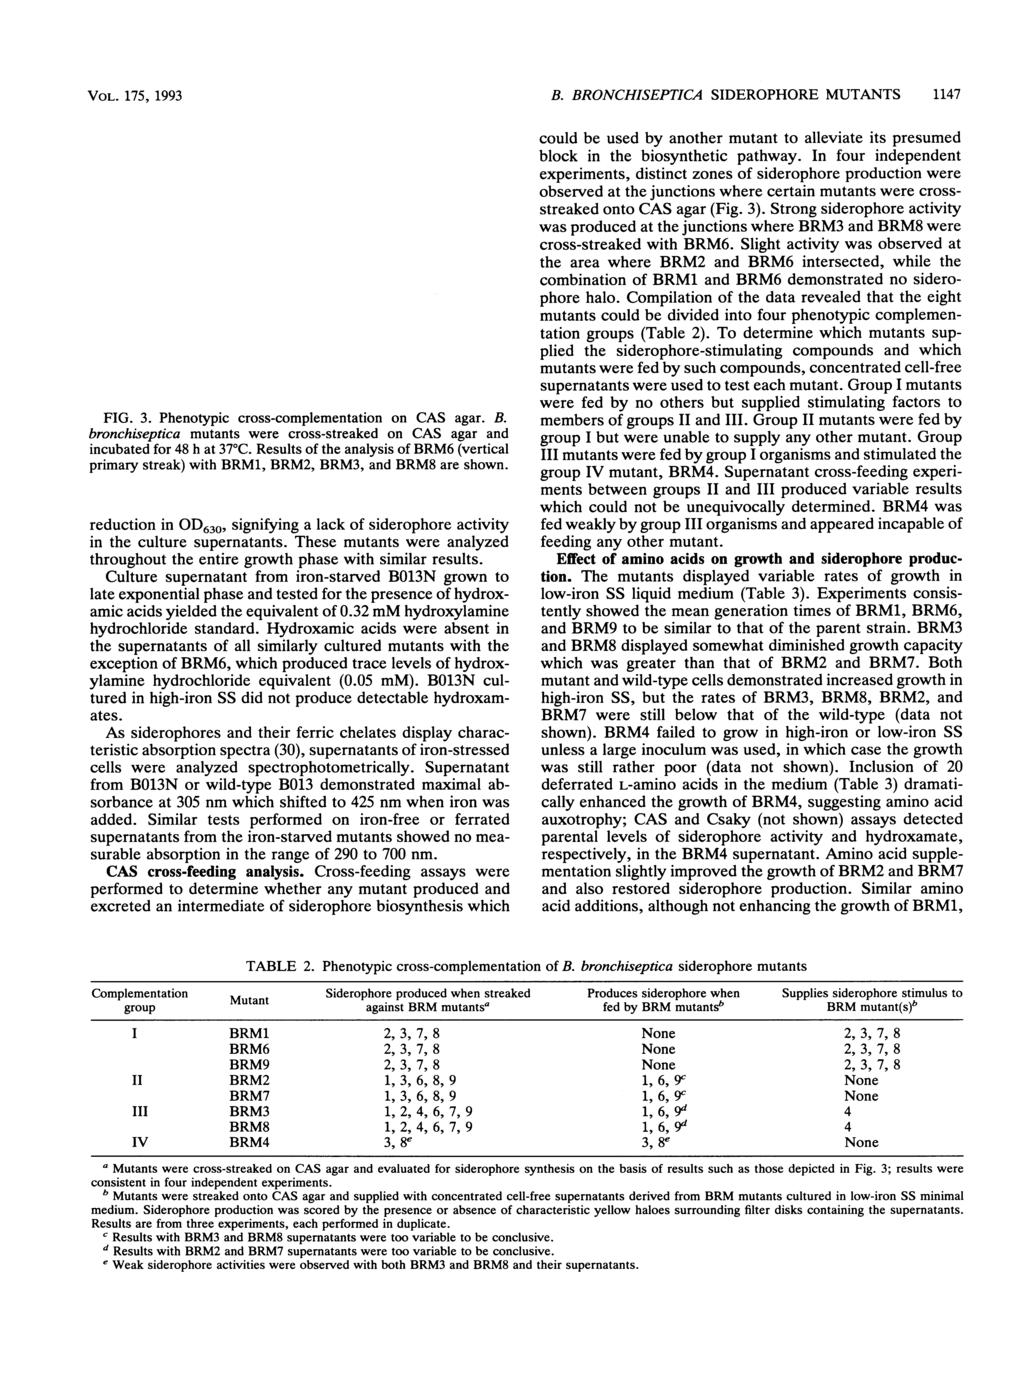 VOL. 175, 1993 FIG. 3. Phenotypic cross-complementation on CAS agar. B. bronchiseptica mutants were cross-streaked on CAS agar and incubated for 48 h at 37 C.